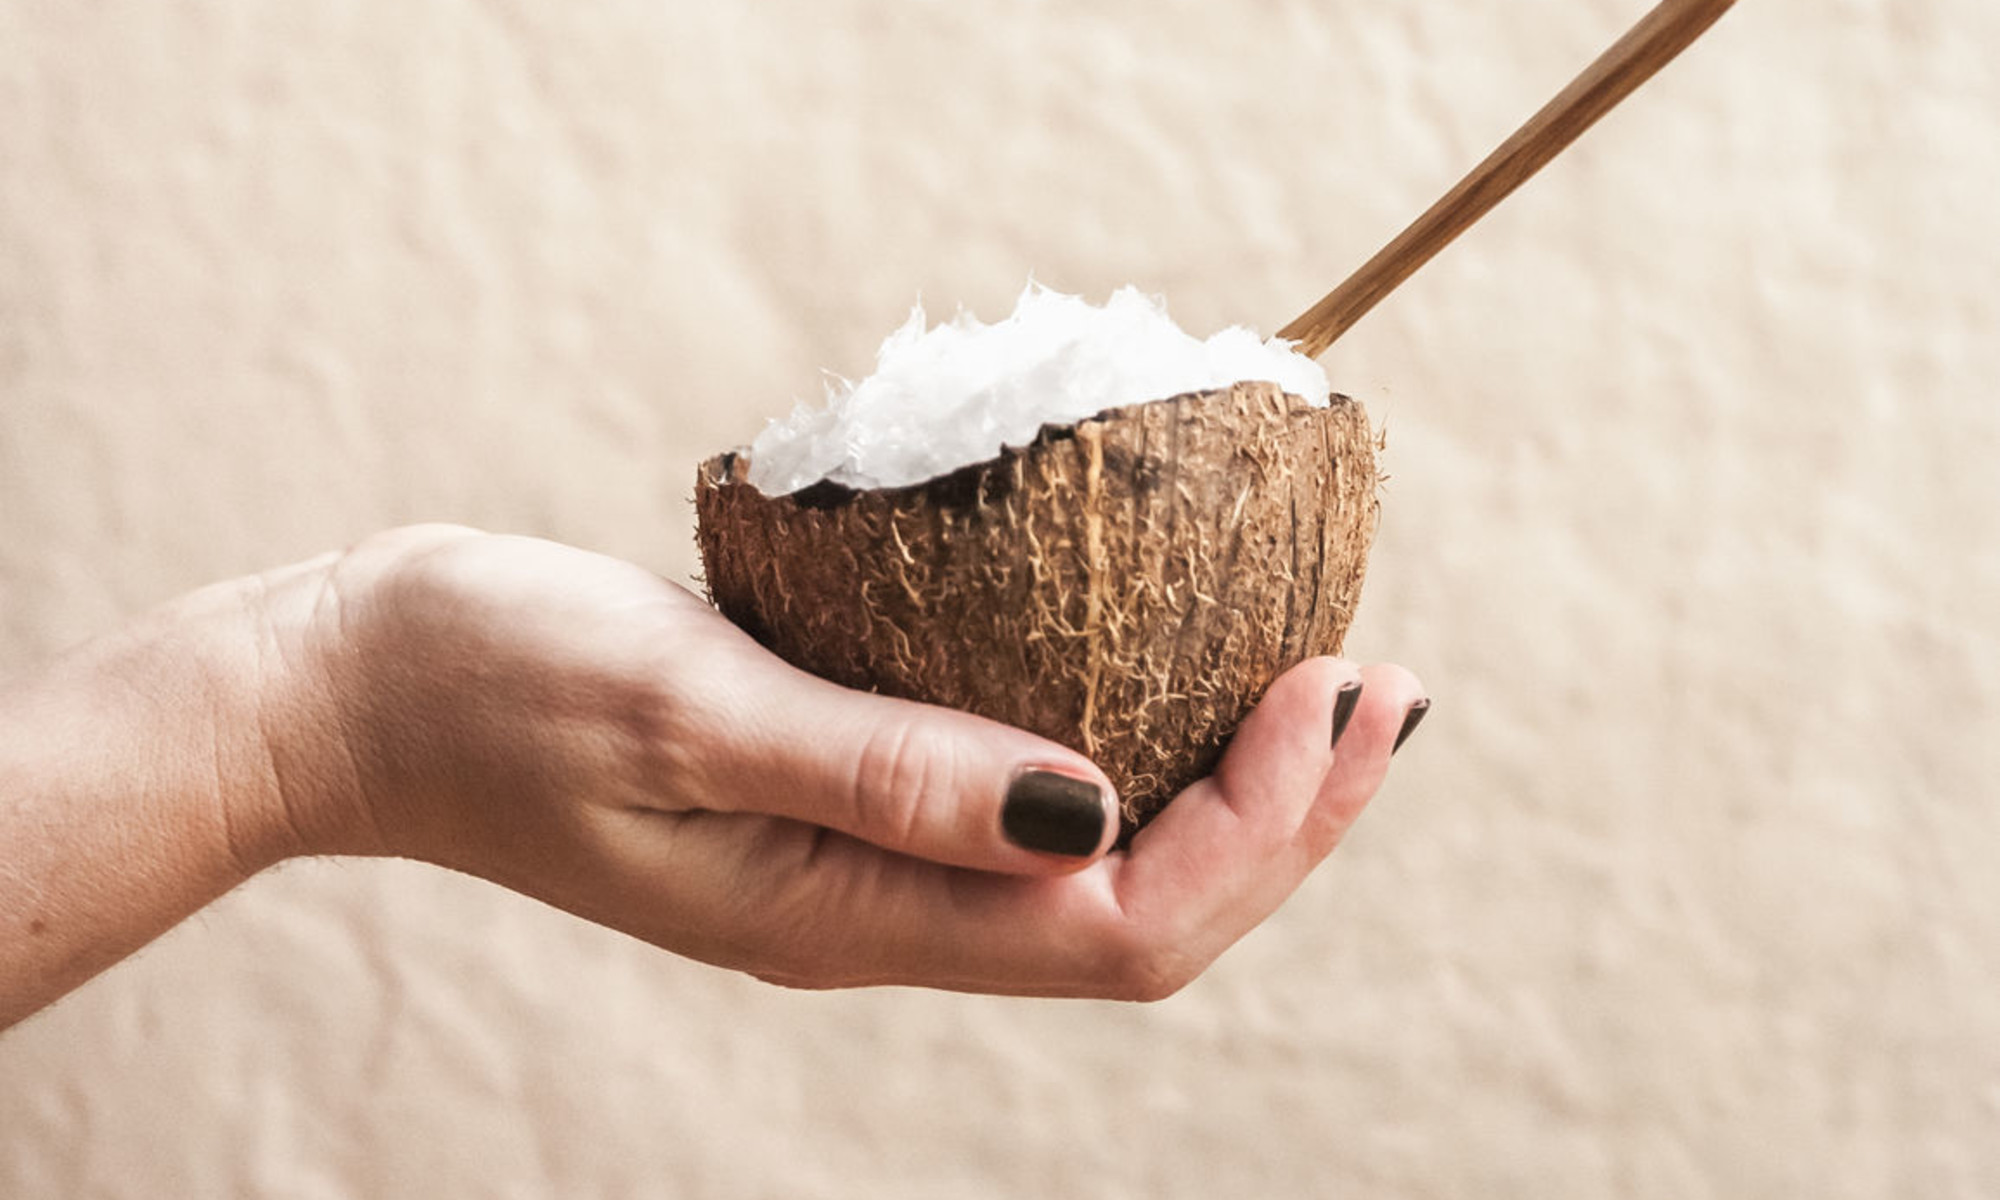 Coconut Oil As Lube Benefits, Risks and How To Use It mindbodygreen